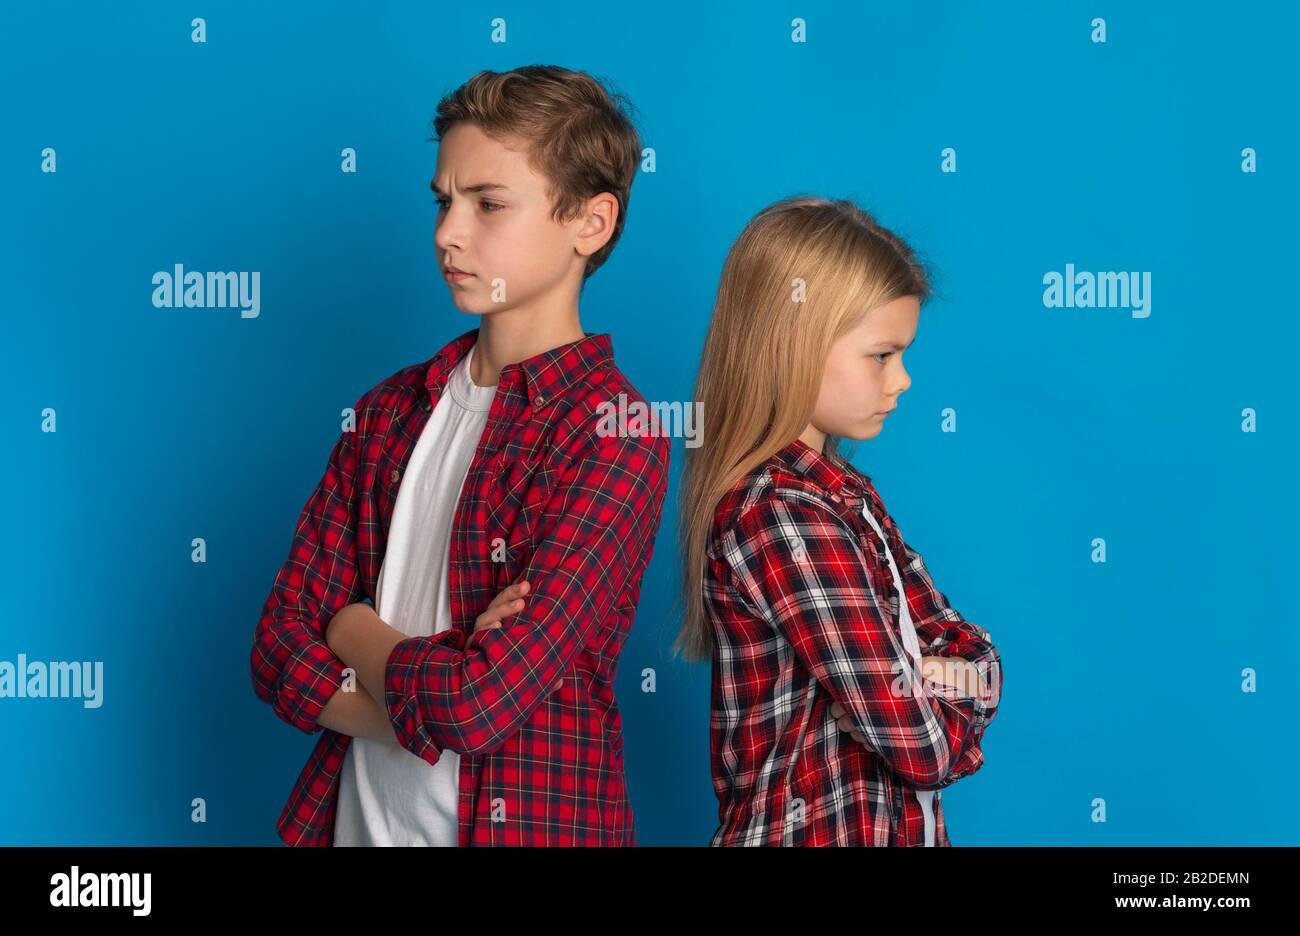 Siblings Misunderstanding. Offended Brother And Sister Ignoring Each Other After Quarrel Stock Photo